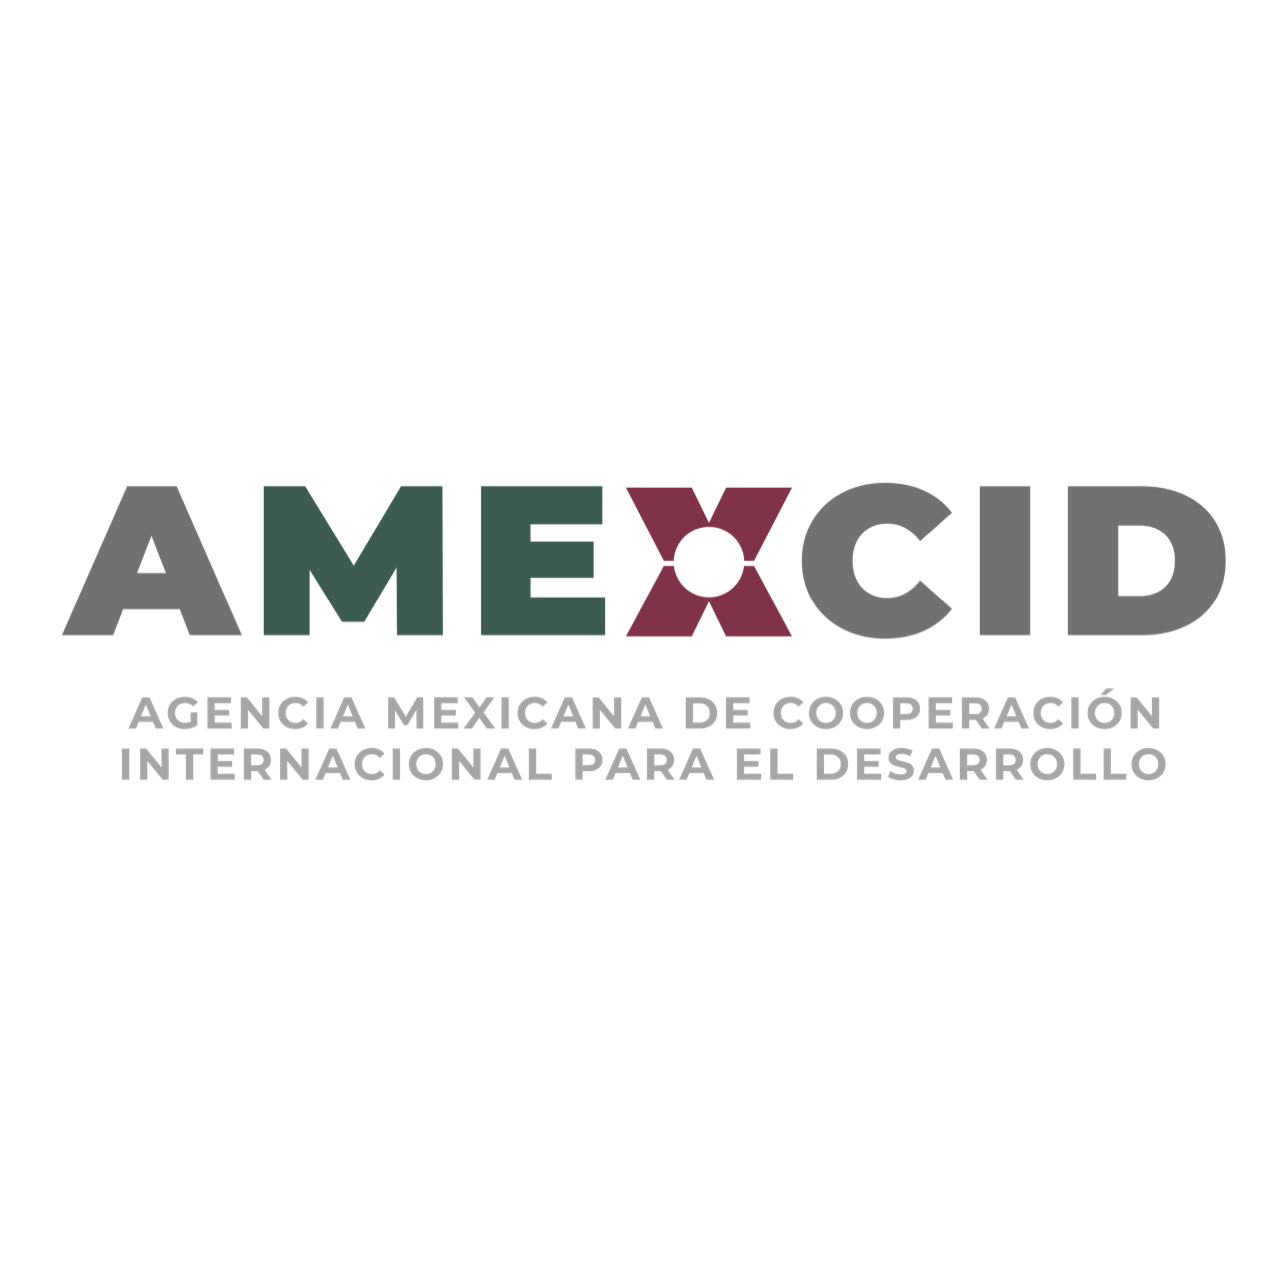 Mexican Agency for International Development Cooperation (AMEXCID)